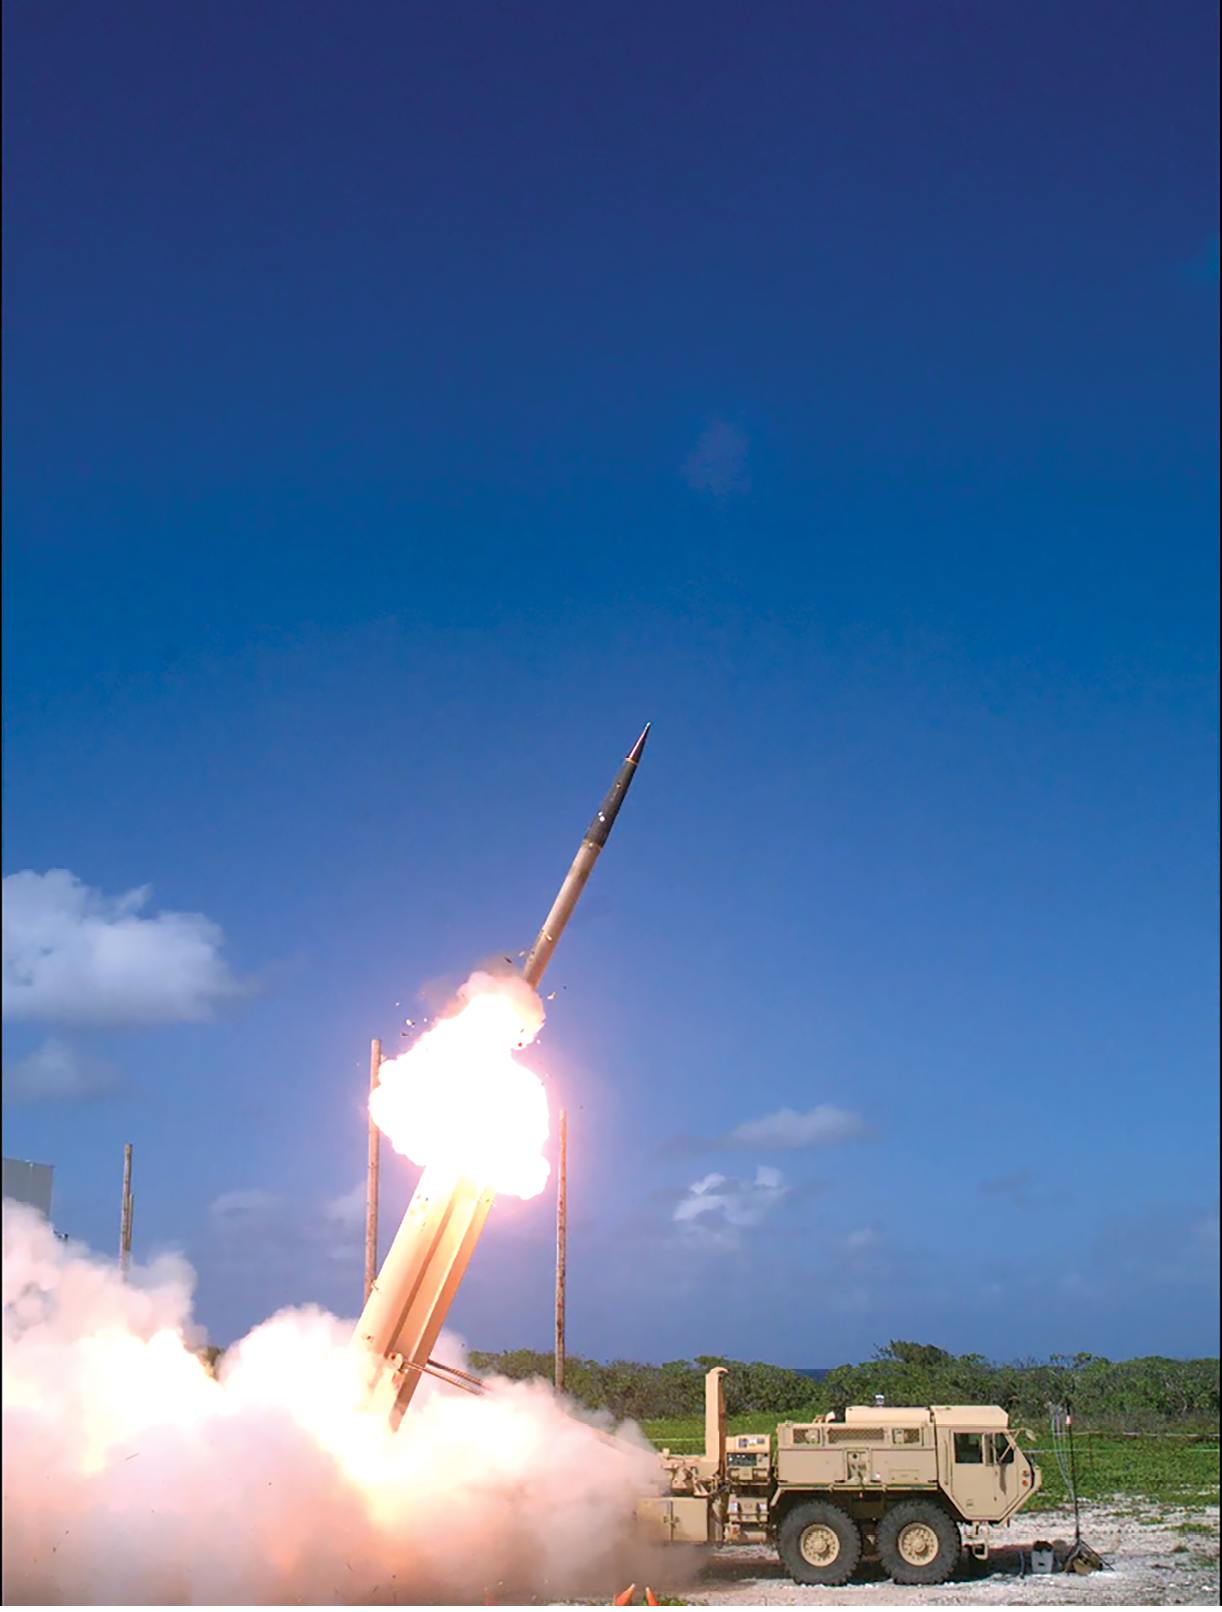 A Terminal High Altitude Area Defense (THAAD) interceptor missile is launched during a flight test 1 November 2015 from a THAAD battery located on Wake Island, which lies northeast of Micronesia in the Pacific Ocean. During the test, the THAAD system successfully intercepted two air-launched ballistic missile targets. (Photo by Ben Listerman, U.S. Missile Defense Agency)